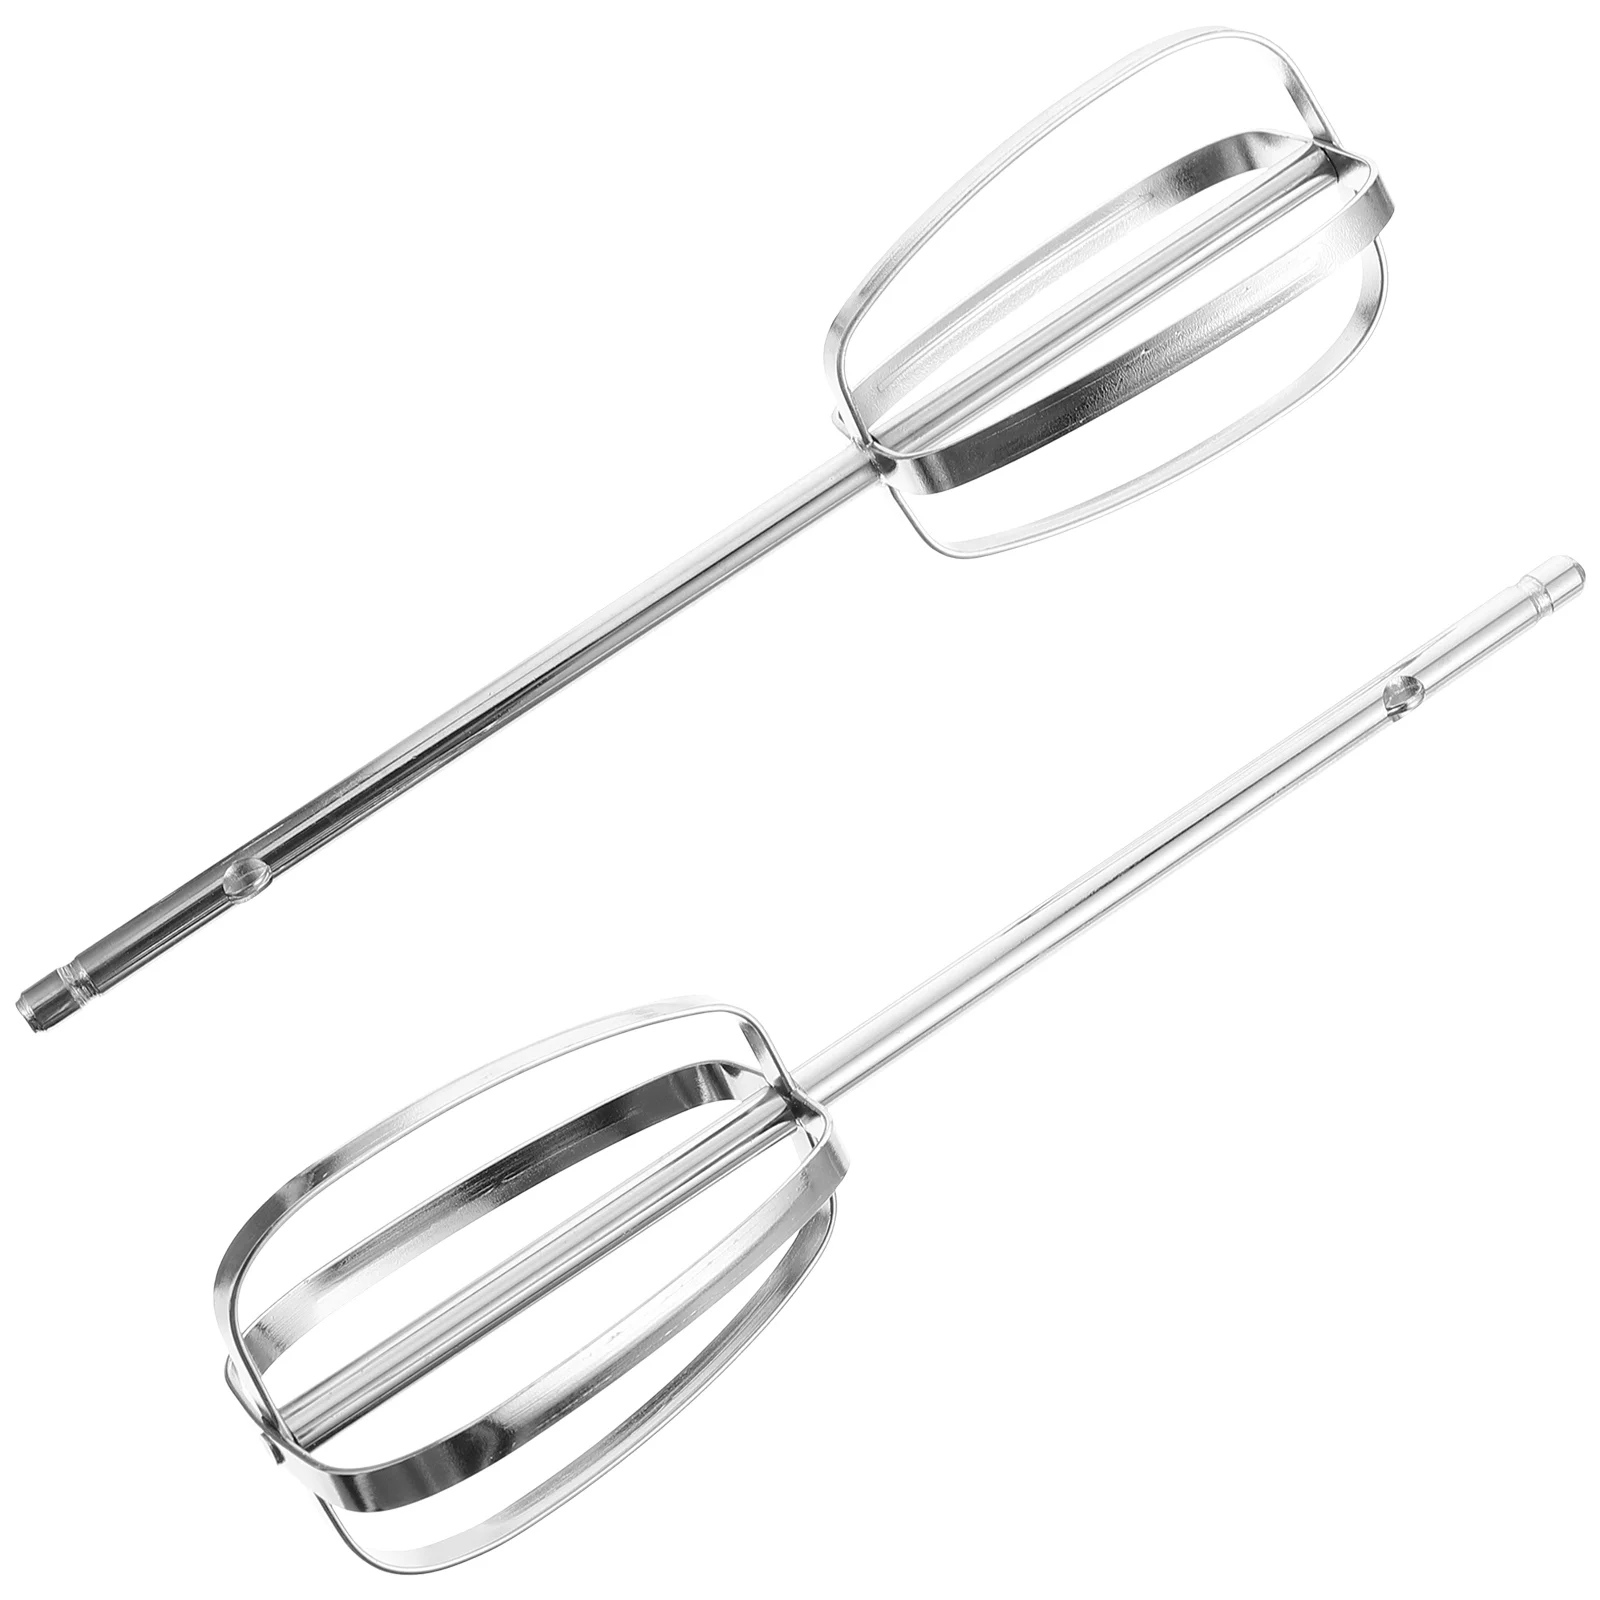 

Whisk Hand-held Egg Beater Cooking Manual Eggbeater Stainless Steel Mixer Mixing Tool Electric Handheld